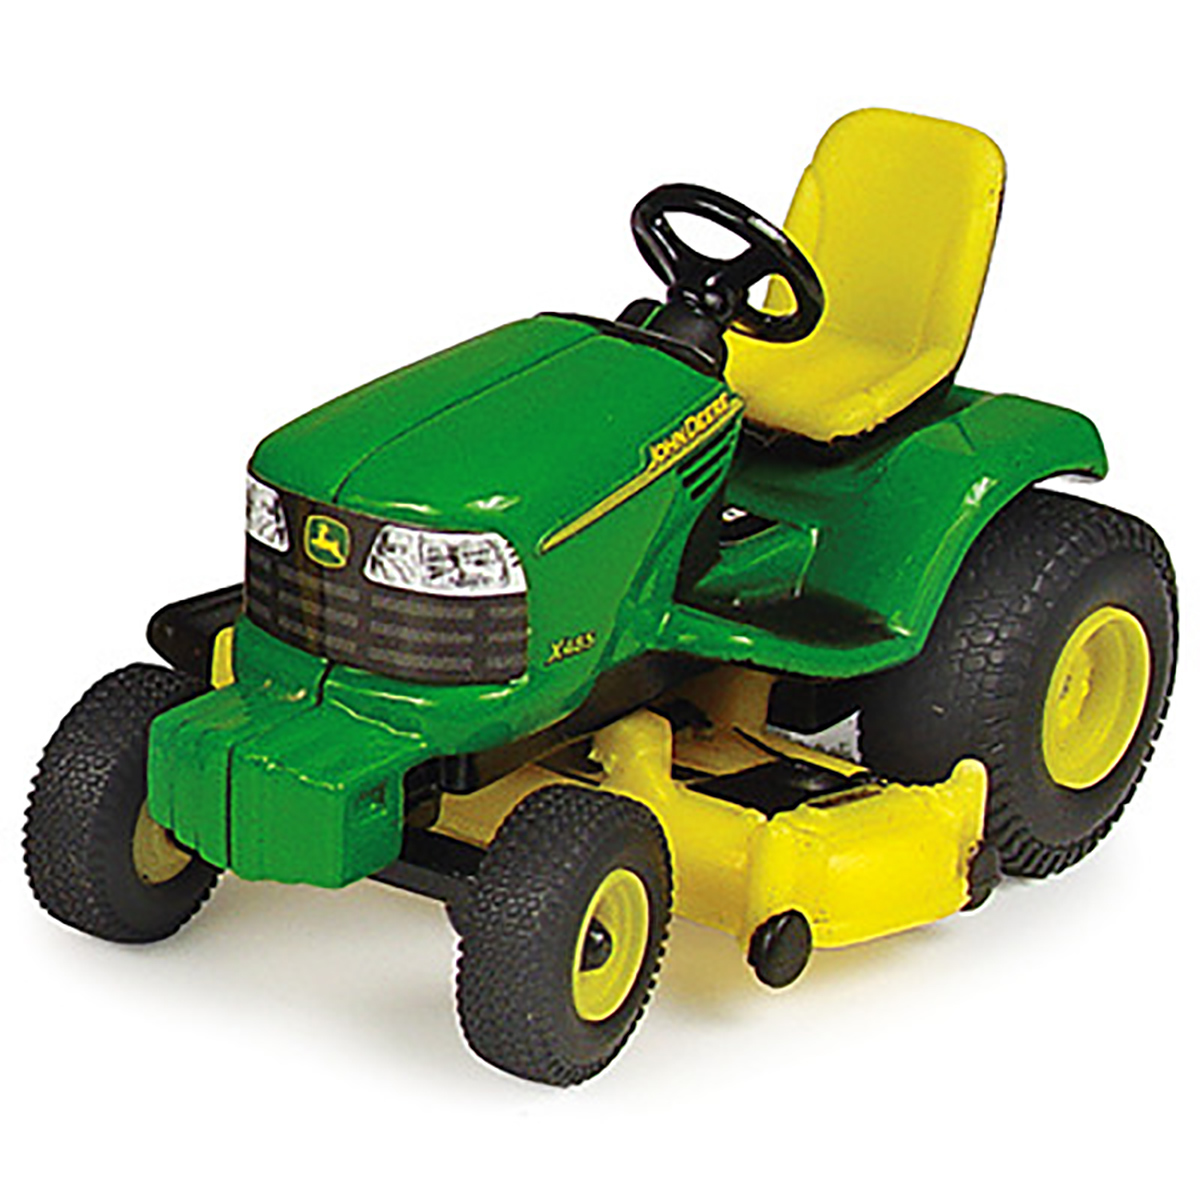 ERTL Quality Riding Tractor John Deere Very Cool With Lawn Mower Deck 